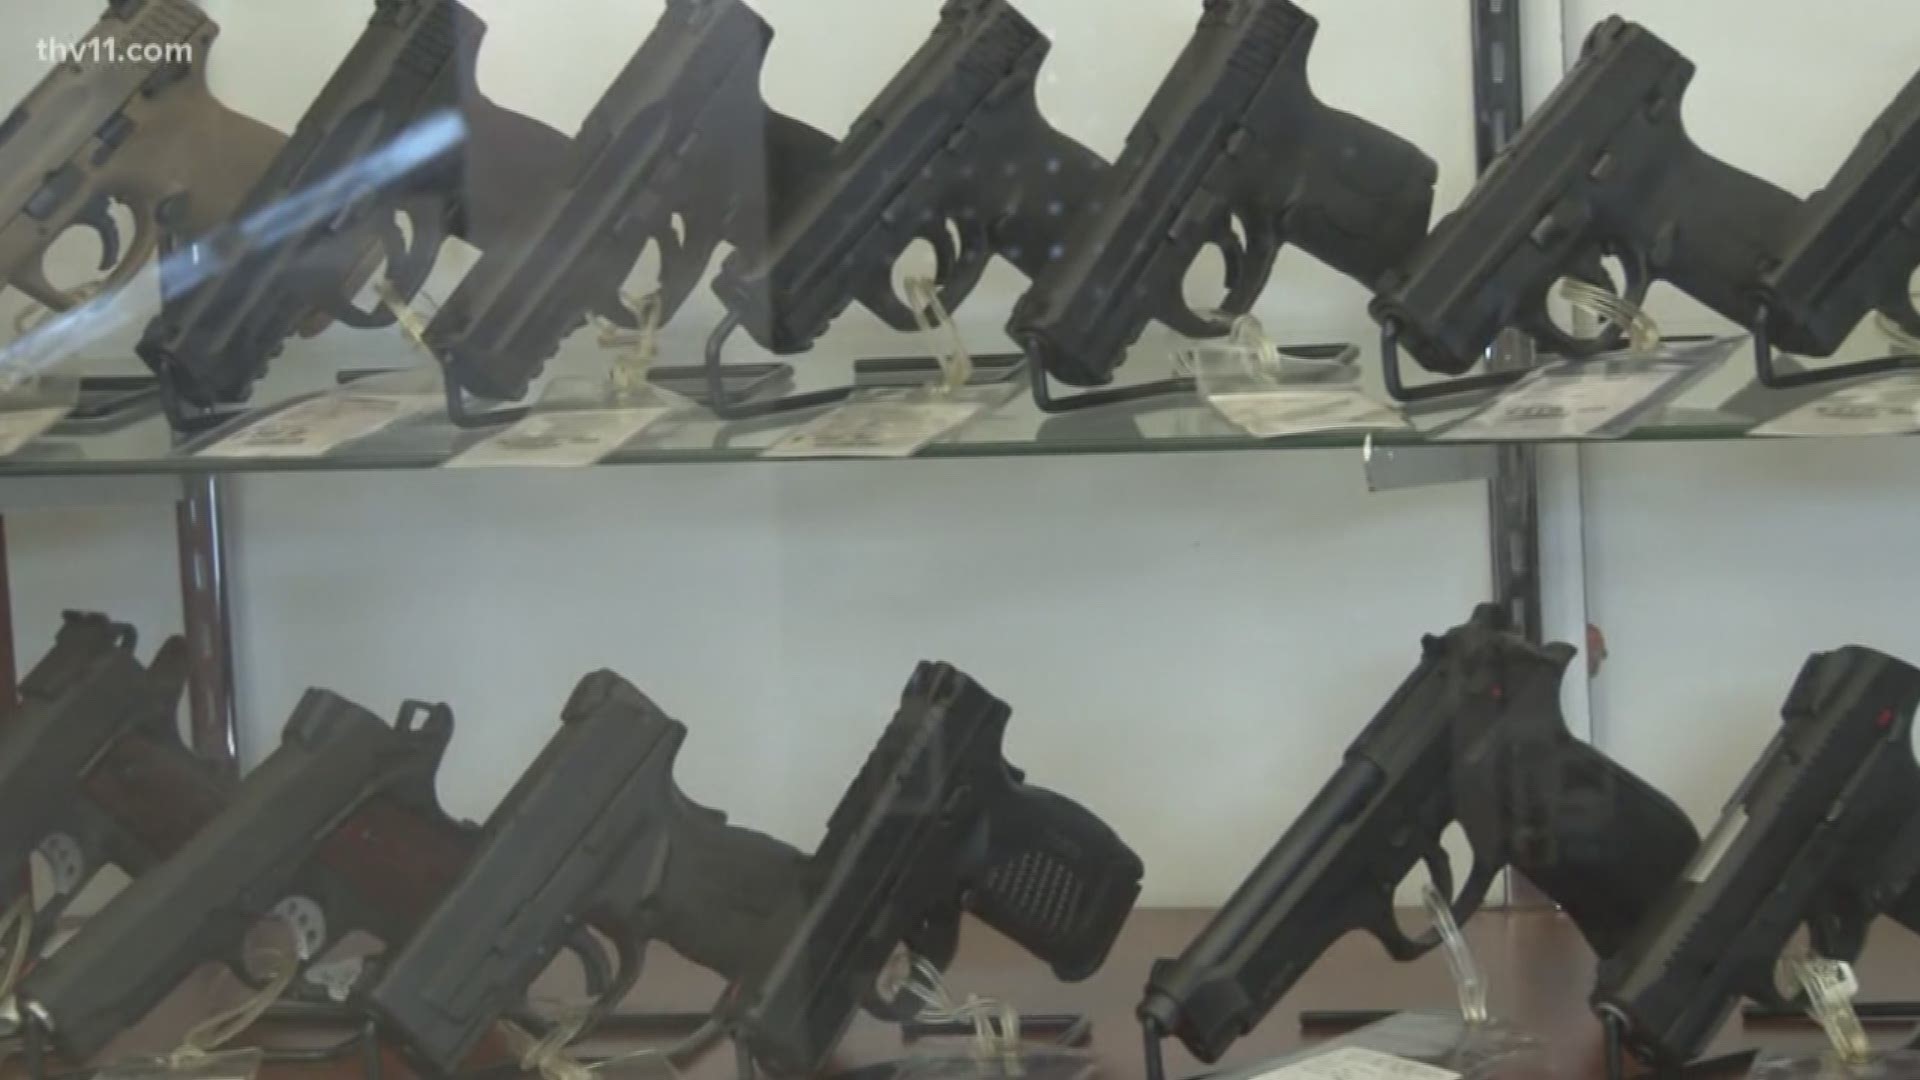 There are a lot of questions pertaining to the right to own a gun and how medical marijuana effects it. THV11's Rolly Hoyt tries to answer those questions.